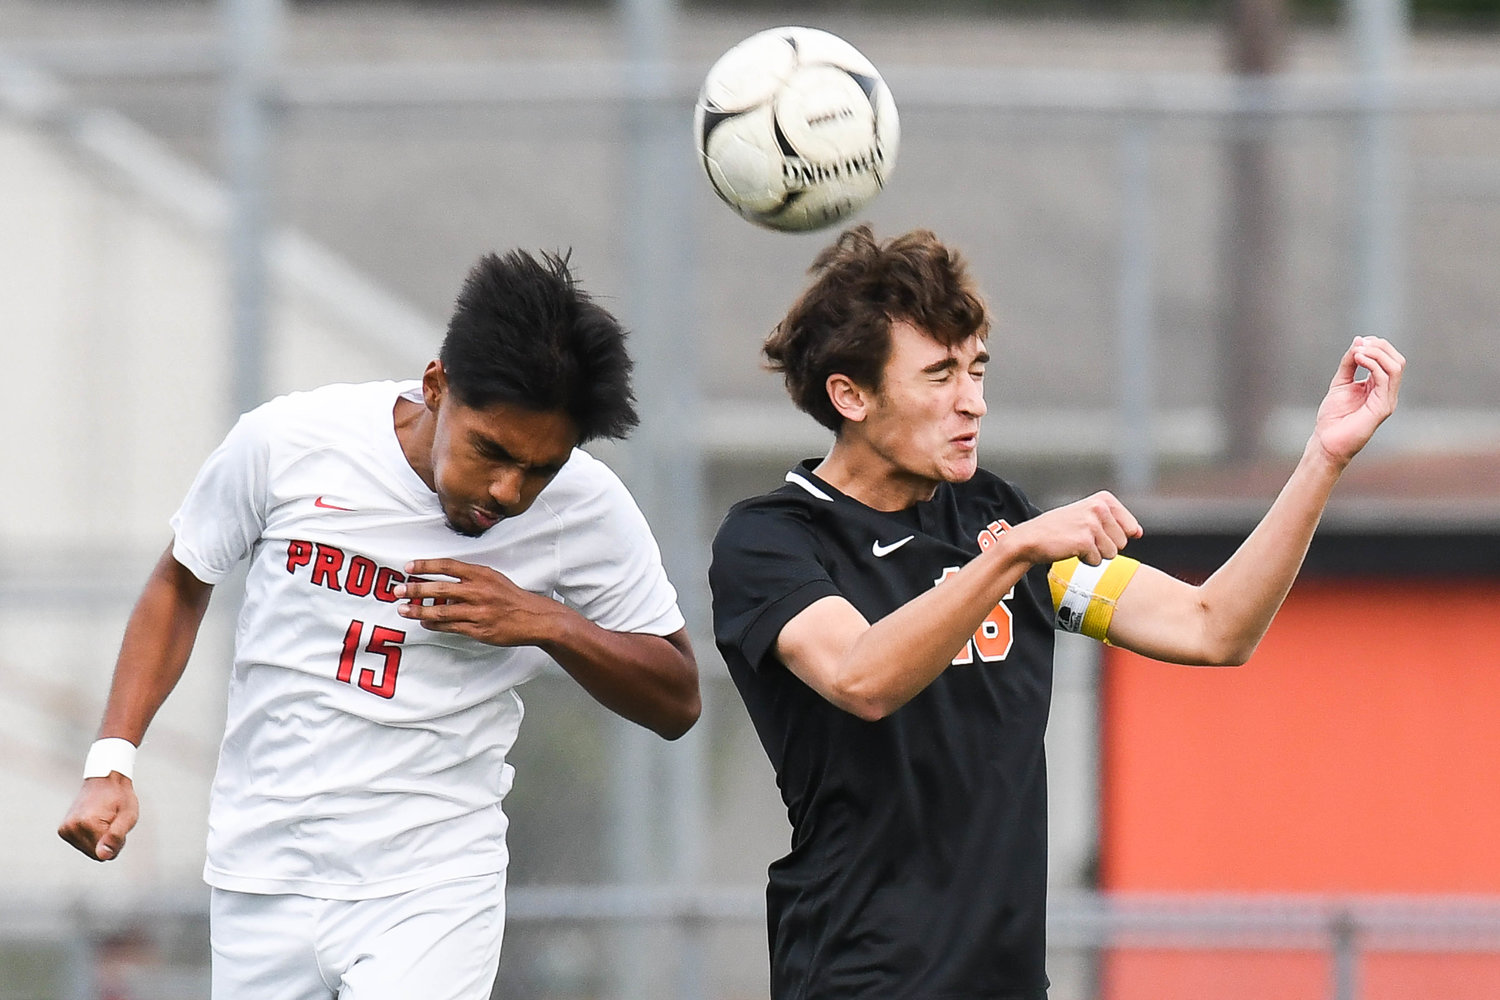 Proctor’s Weya Myint, left, and Rome Free Academy player Lucas Yanik both go up to head the ball during a Tri-Valley League game on Tuesday at RFA Stadium. The visiting Raiders won 4-0.